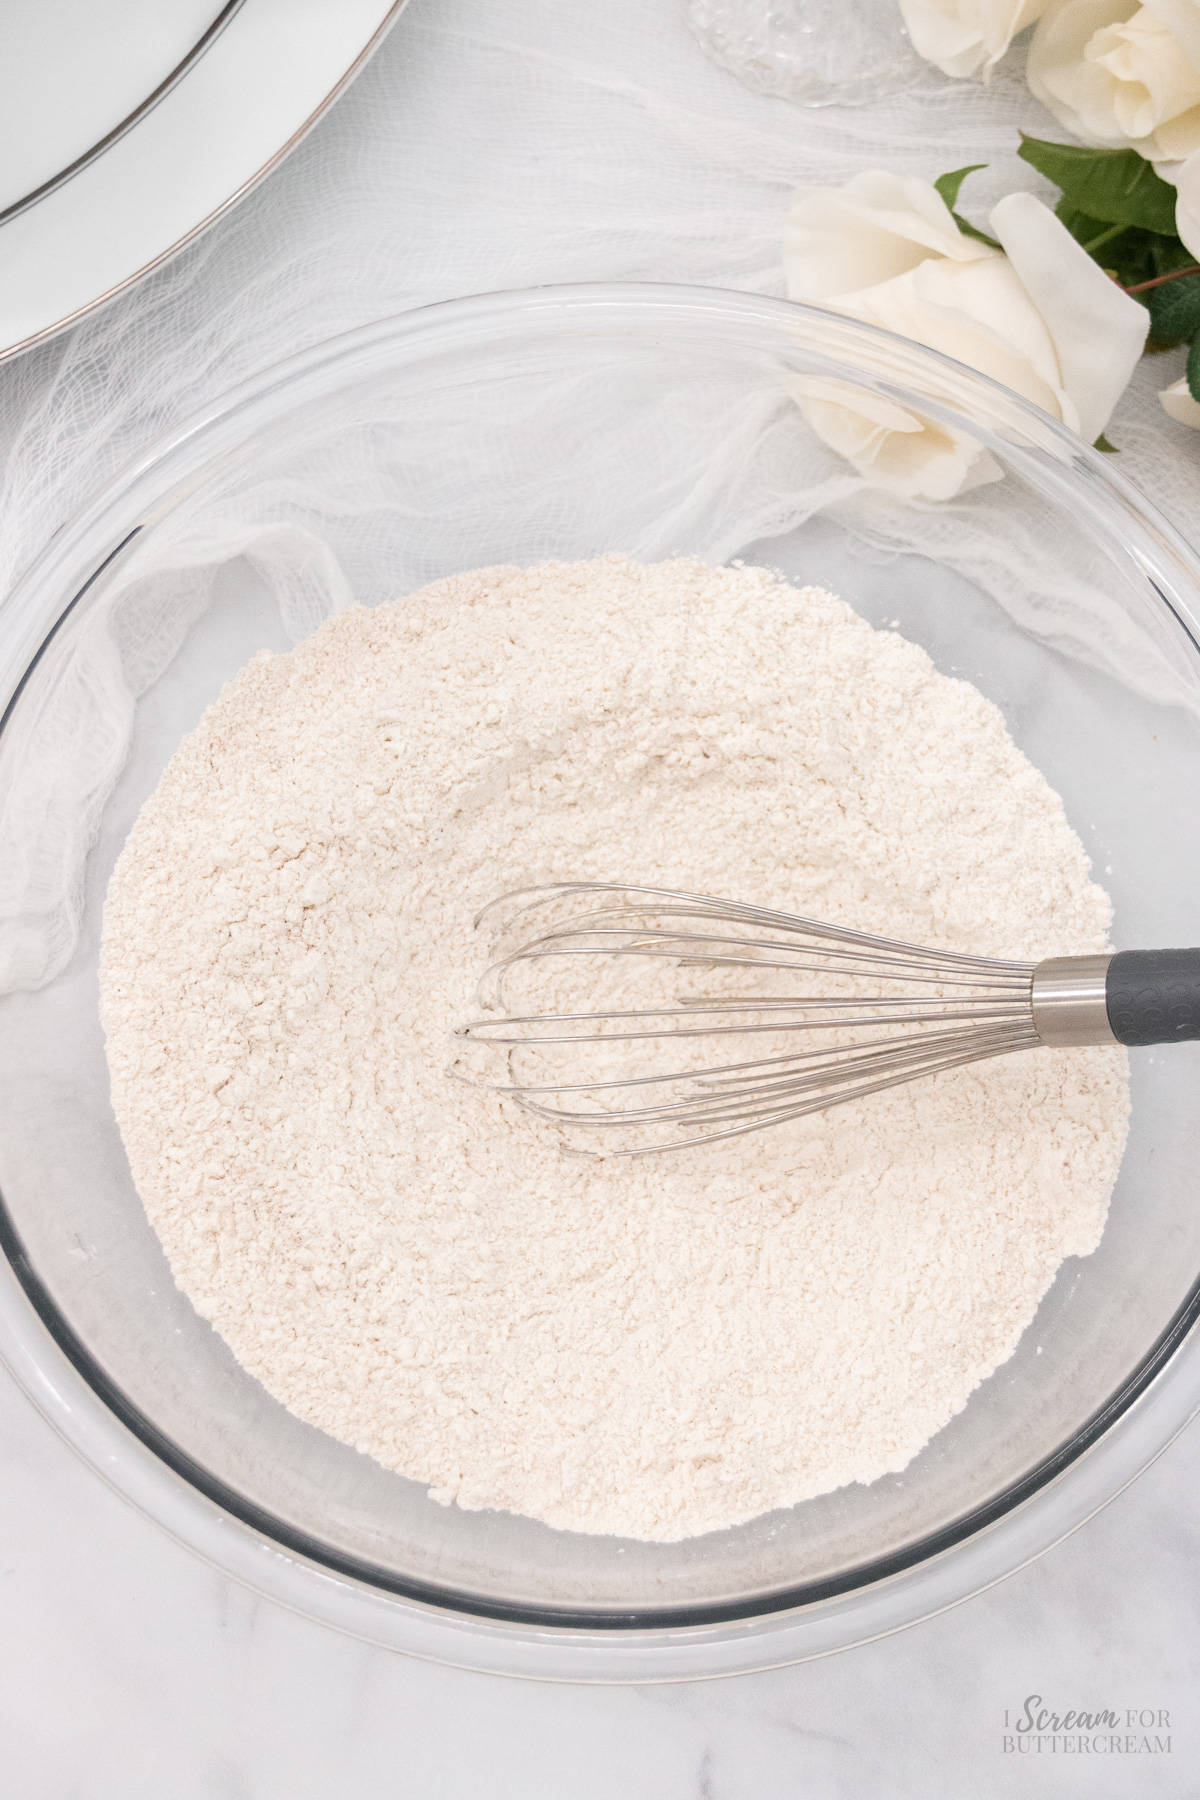 Dry cake ingredients in a glass bowl with a whisk.